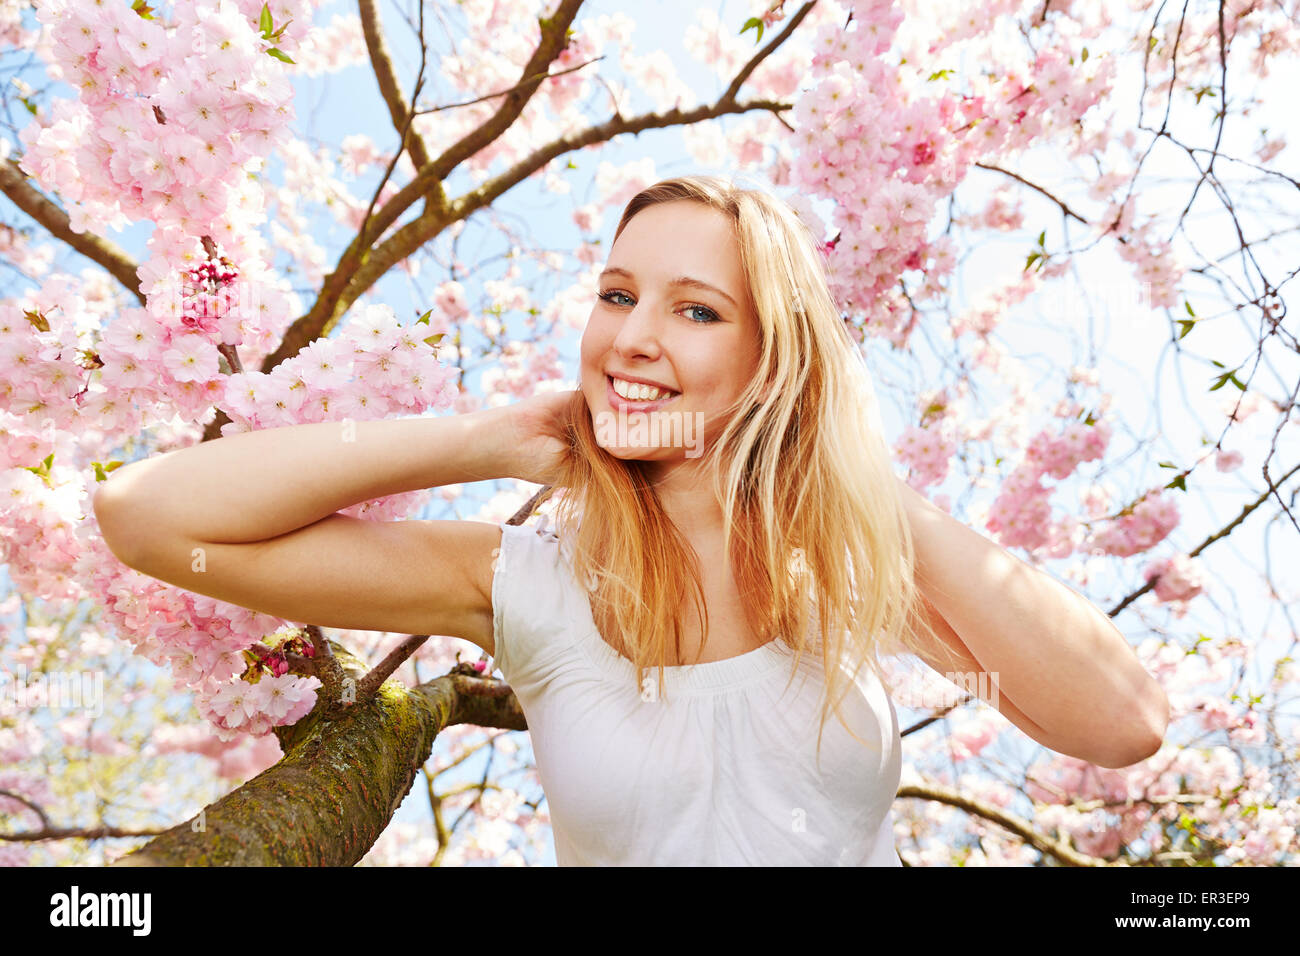 Blonde woman sitting in a blooming cherry tree in spring in a garden Stock Photo